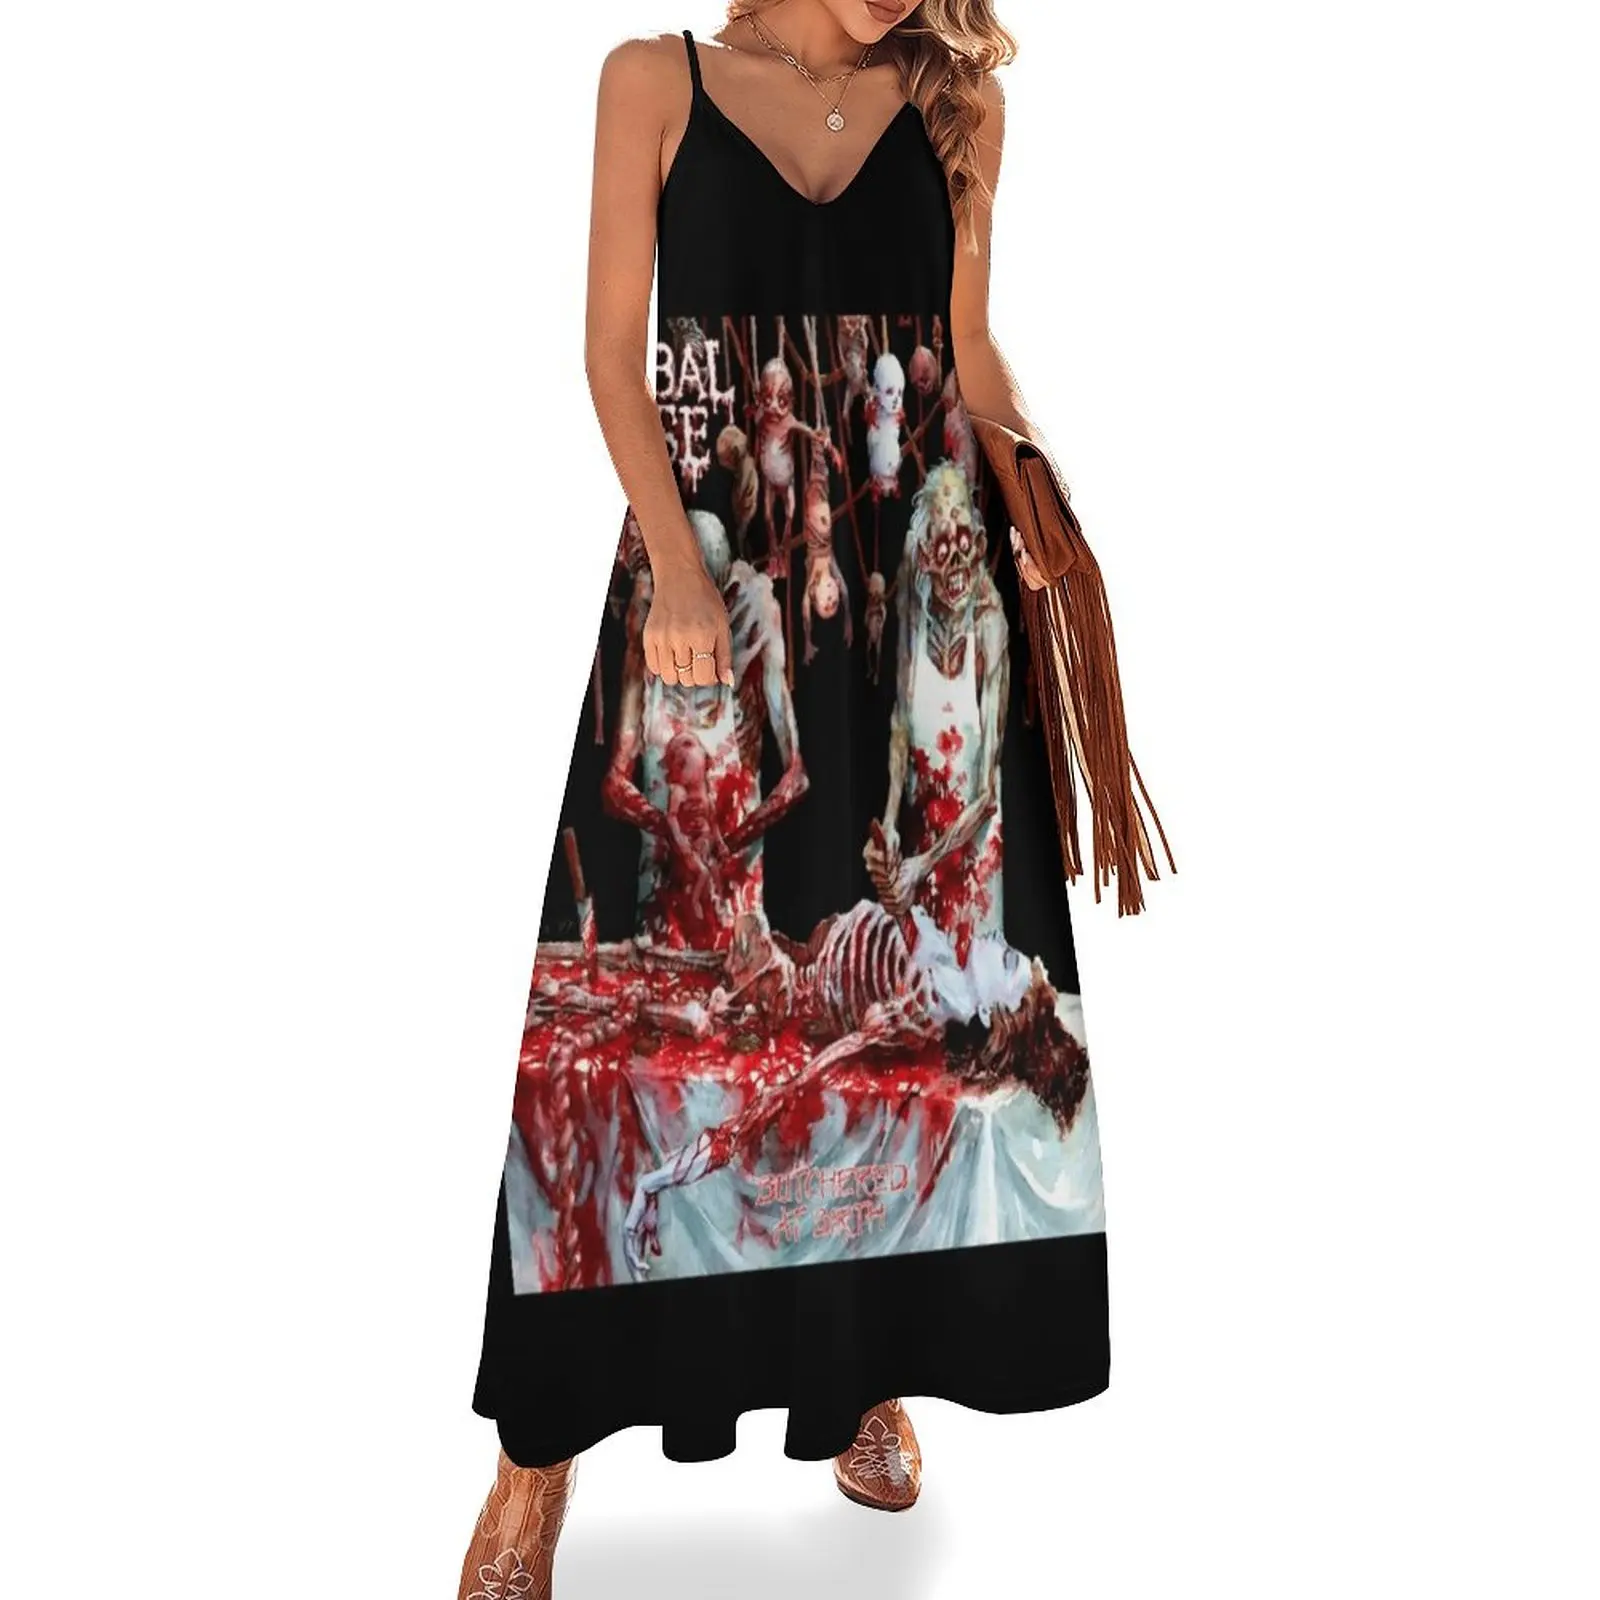 

Cannibal Corpse butchered at birth Sleeveless Dress Woman clothes women formal occasion dresses